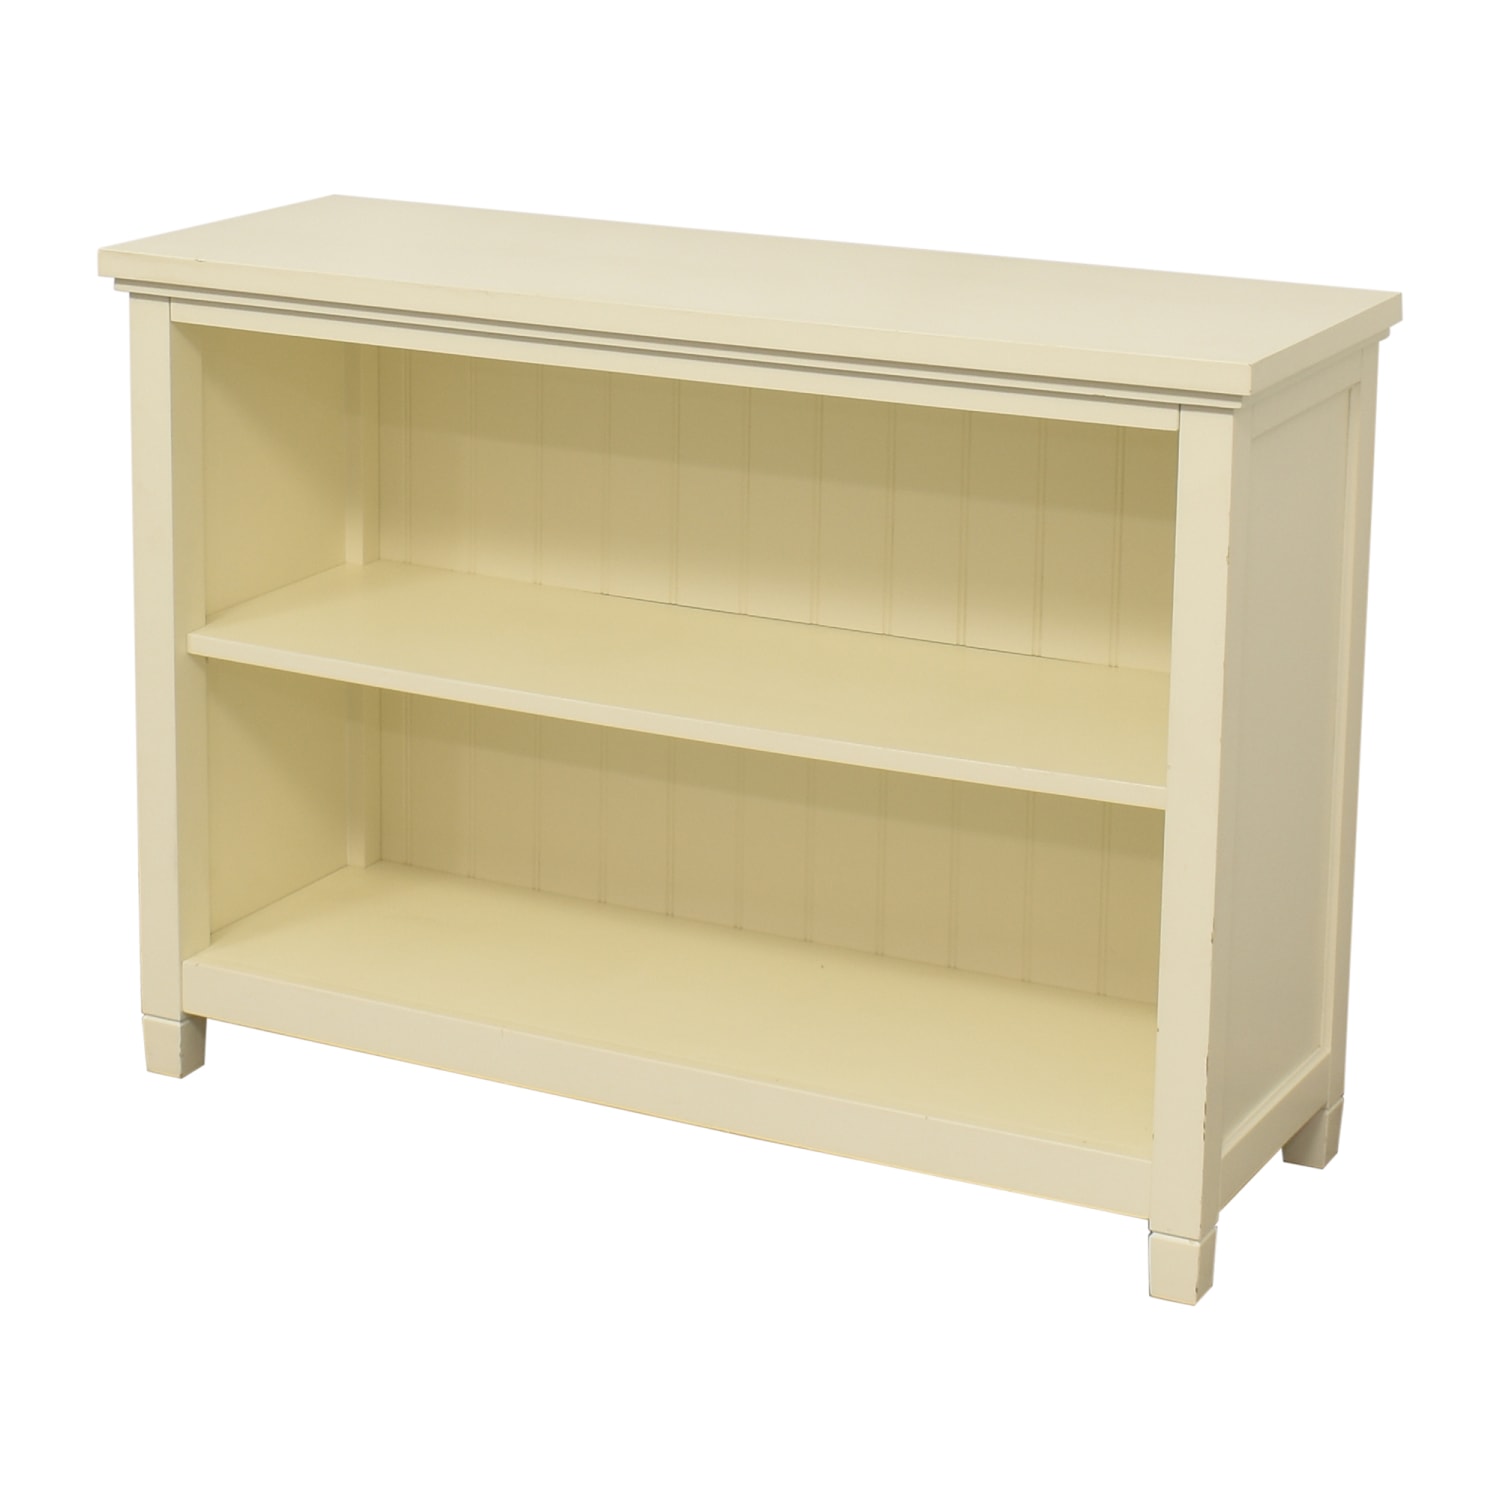 https://res.cloudinary.com/dkqtxtobb/image/upload/f_auto,q_auto:best,w_1500/product-assets/388166/pottery-barn-teen/storage/bookcases-shelving/used-pottery-barn-teen-beadboard-2-shelf-bookcase.jpeg